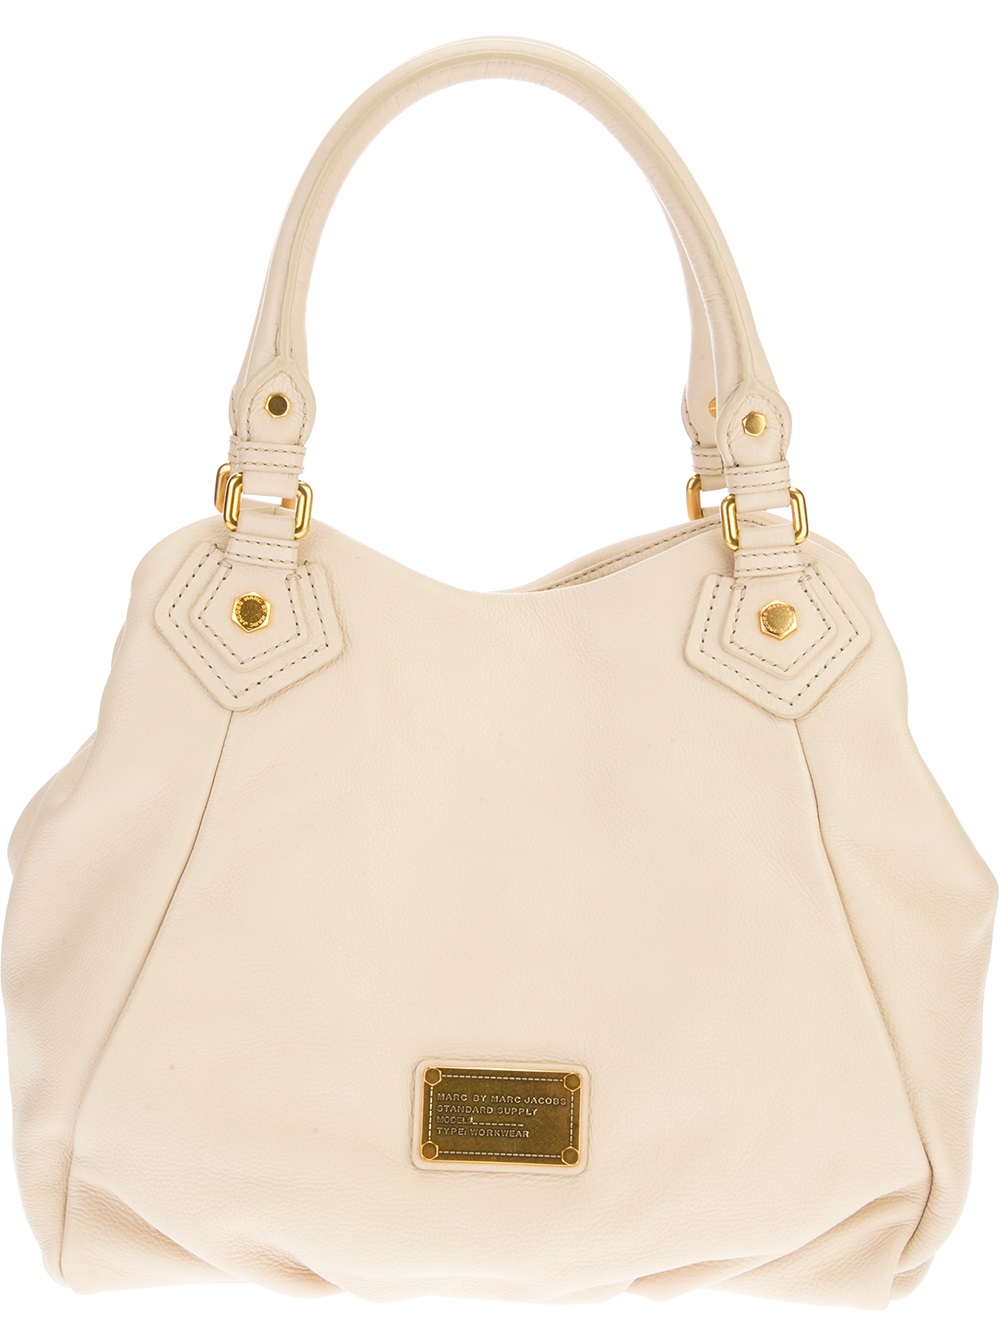 Lyst - Marc By Marc Jacobs Classic Q Fran Shoulder Bag in White